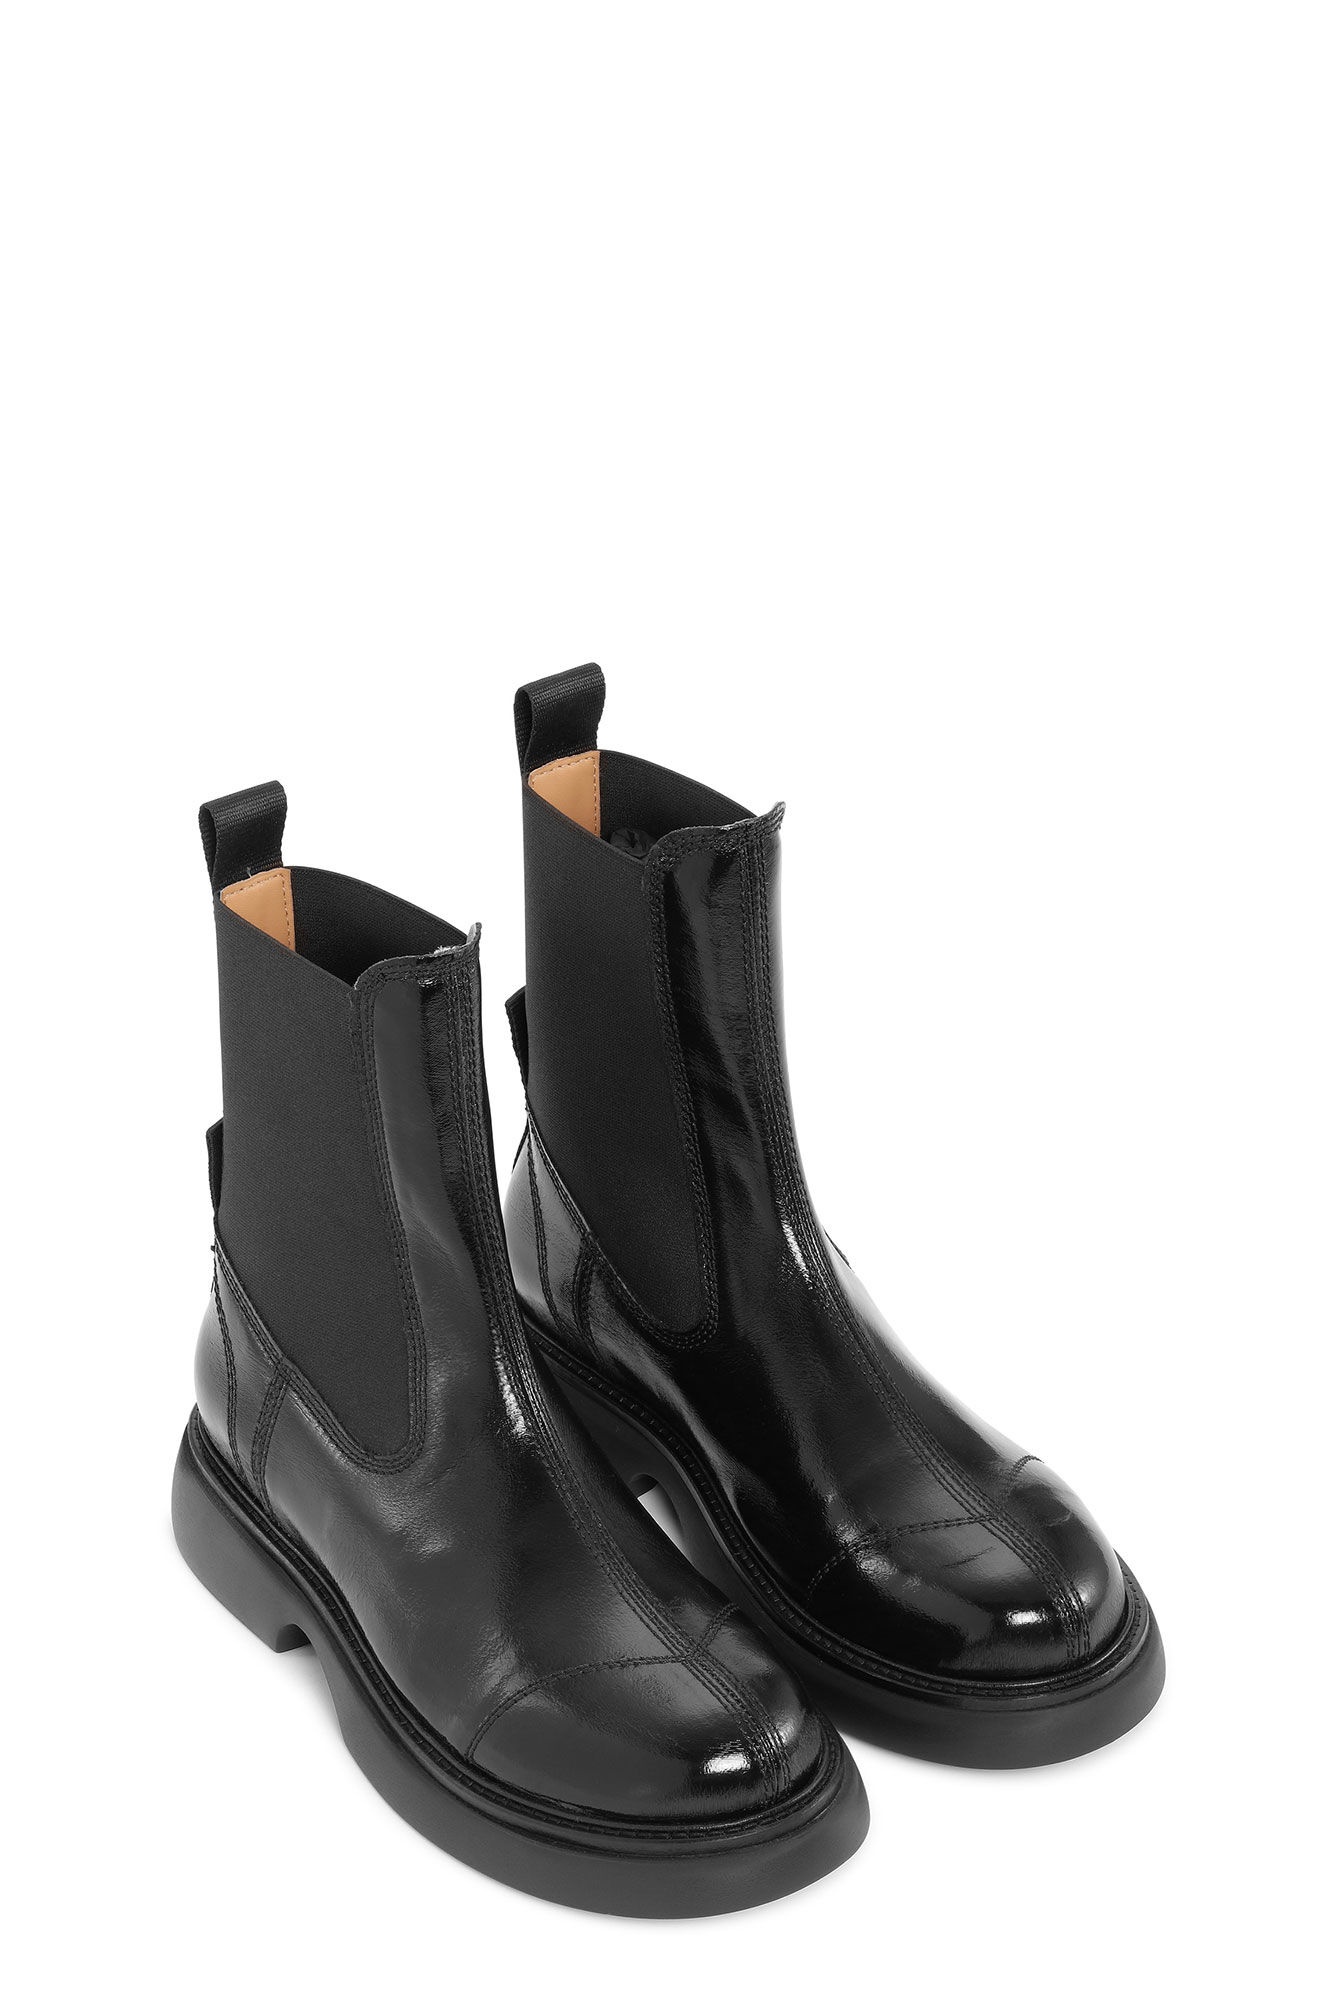 BLACK EVERYDAY MID CHELSEA BOOTS - 2